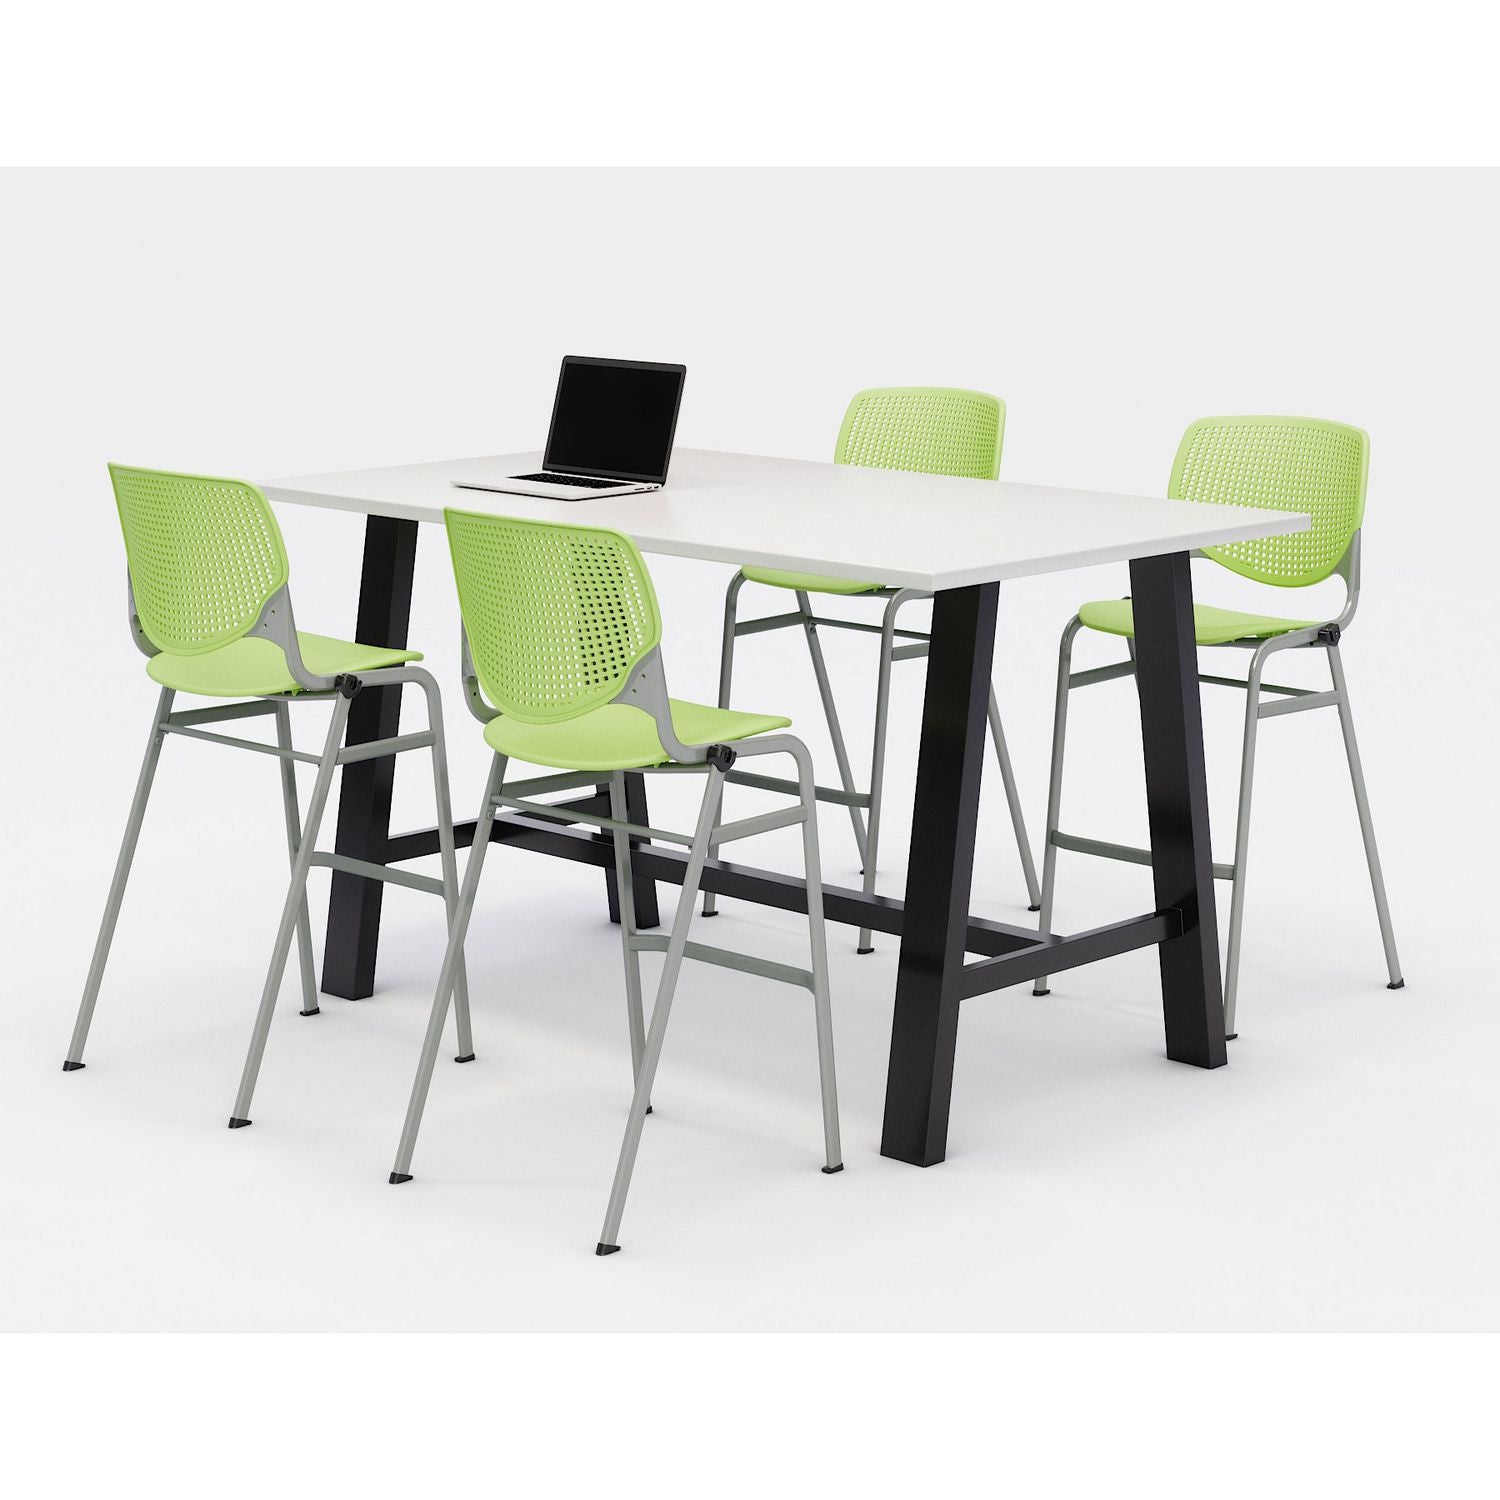 midtown-bistro-dining-table-with-four-lime-green-kool-barstools-36-x-72-x-41-designer-white-ships-in-4-6-business-days_kfi840031900609 - 1